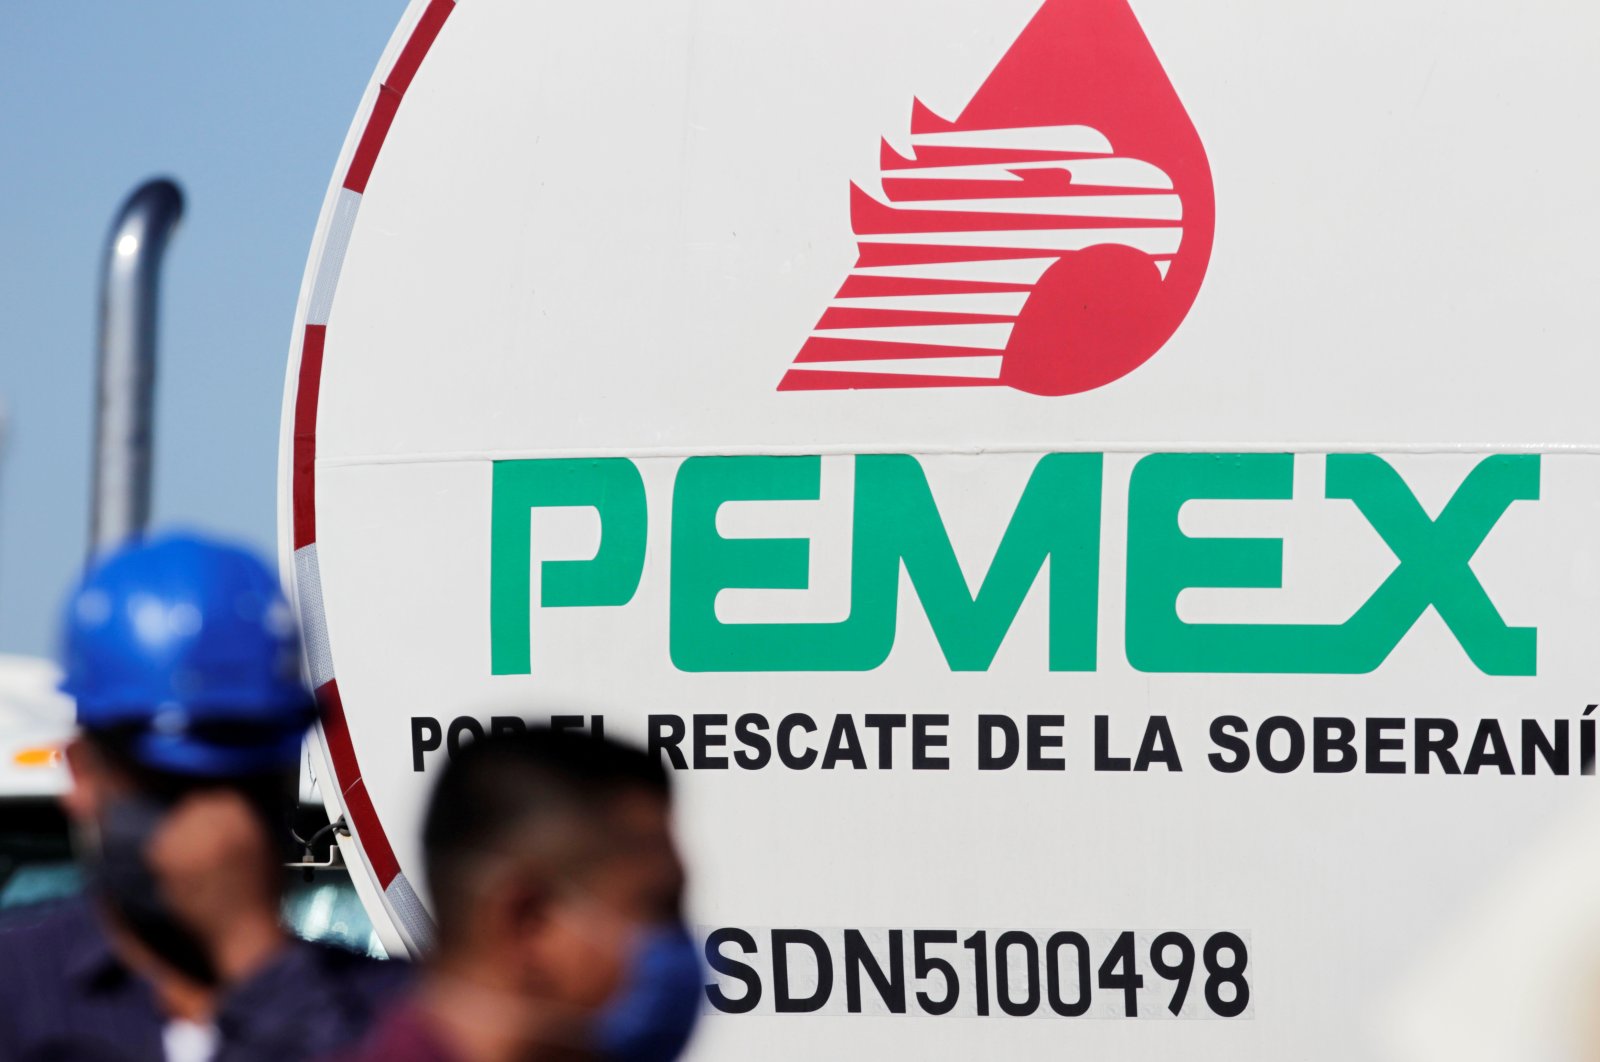 A logo of the Mexican state oil firm Pemex is pictured during a visit of Mexico's president, Andres Manuel Lopez Obrador, at Cadereyta refinery, in Cadereyta, on the outskirts of Monterrey, Mexico, Aug. 27, 2020. (Reuters Photo)